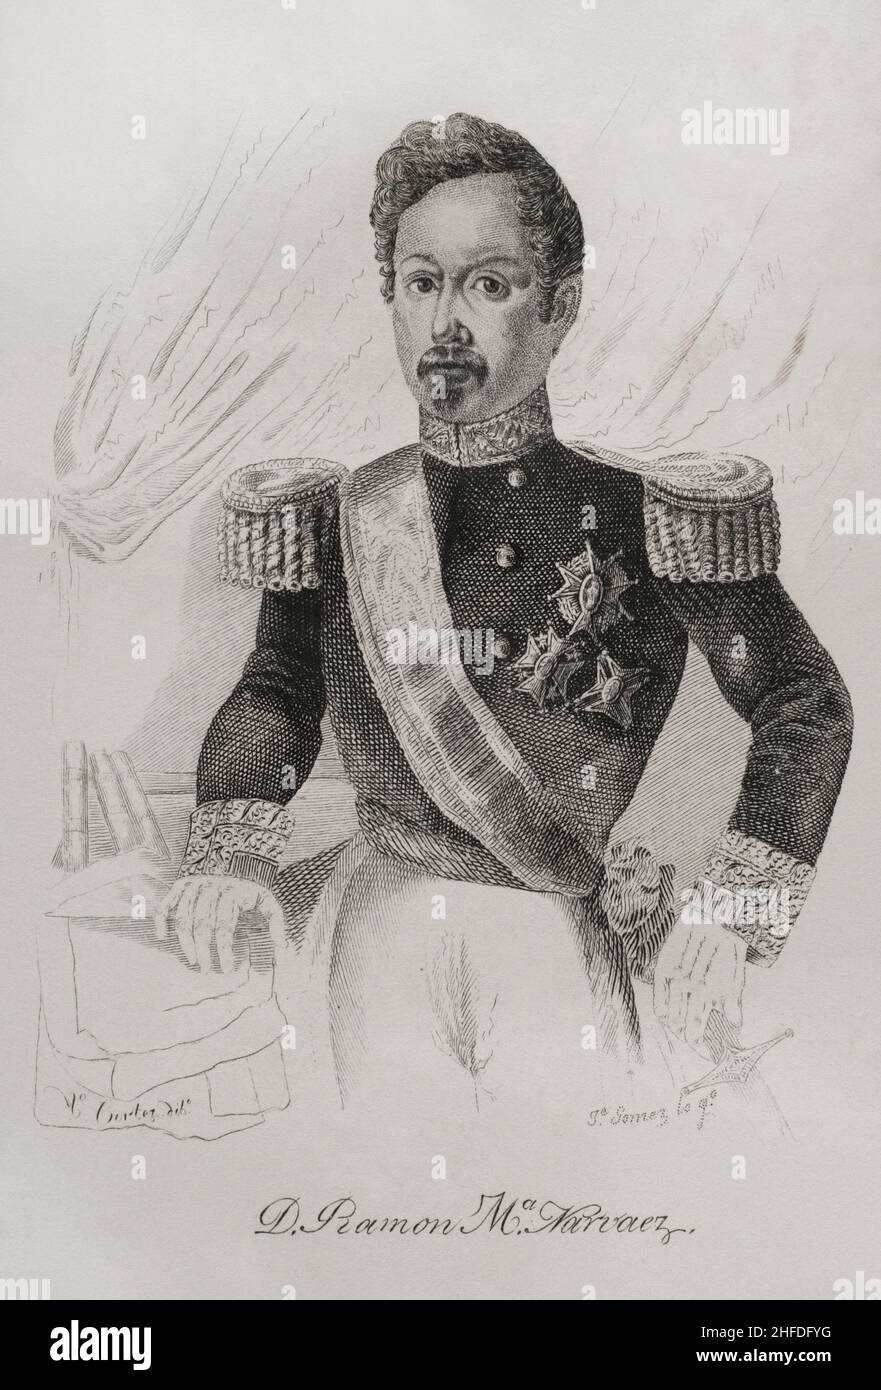 Ramón María Narváez (1799-1868). 1st Duke of Valencia. Spanish general and politician. Leader of the Moderate Party during the reign of Isabella II. Prime minister of Spain on seven occasions between 1844 and 1868. Portrait. Engraving by José Gómez. Panorama Español, Crónica Contemporánea. Volume III. Madrid, 1845. Author: José Gómez. 19th century-Spanish engraver. Stock Photo